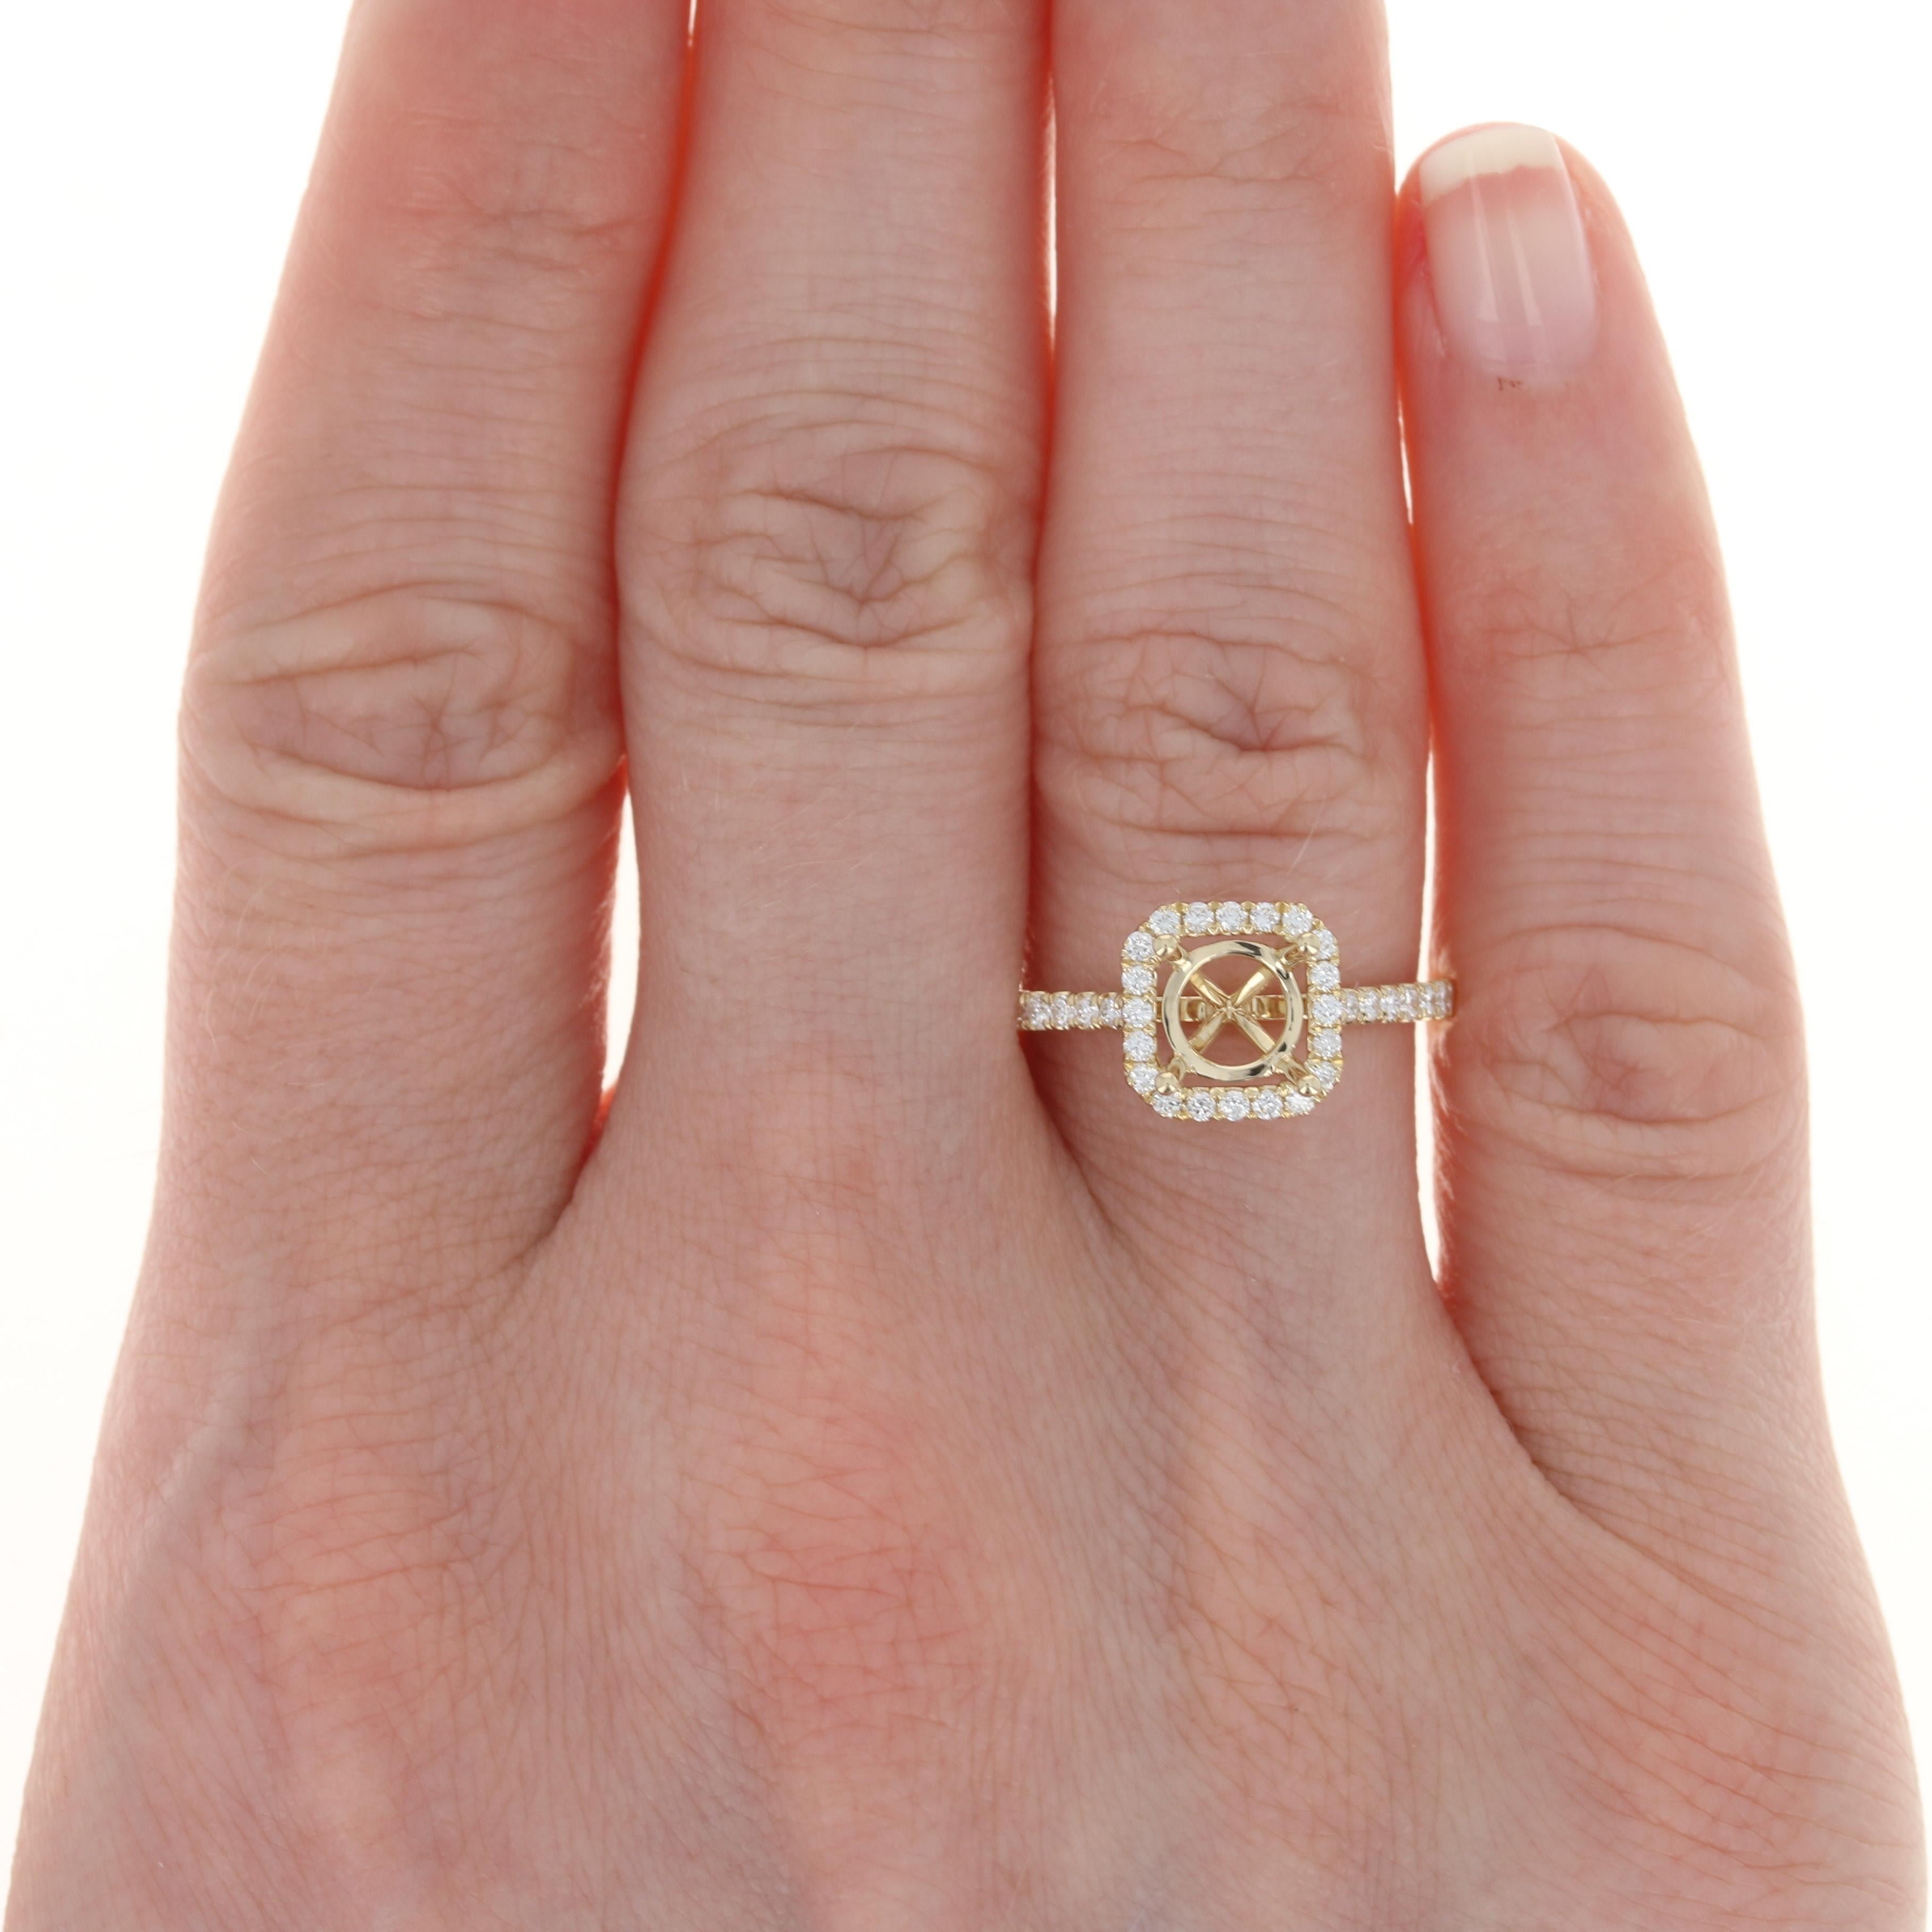 Size: 6 1/2
Sizing Fee: Up 2 sizes for $25

Brand: S. Kashi

Metal Content: 14k Yellow Gold 

Stone Information: 
Natural Diamond Accents
Total Carats: .35ctw
Cut: Round Brilliant 
Color: G 
Clarity: SI1

Center Fits Stone Size: ~6.5mm Round